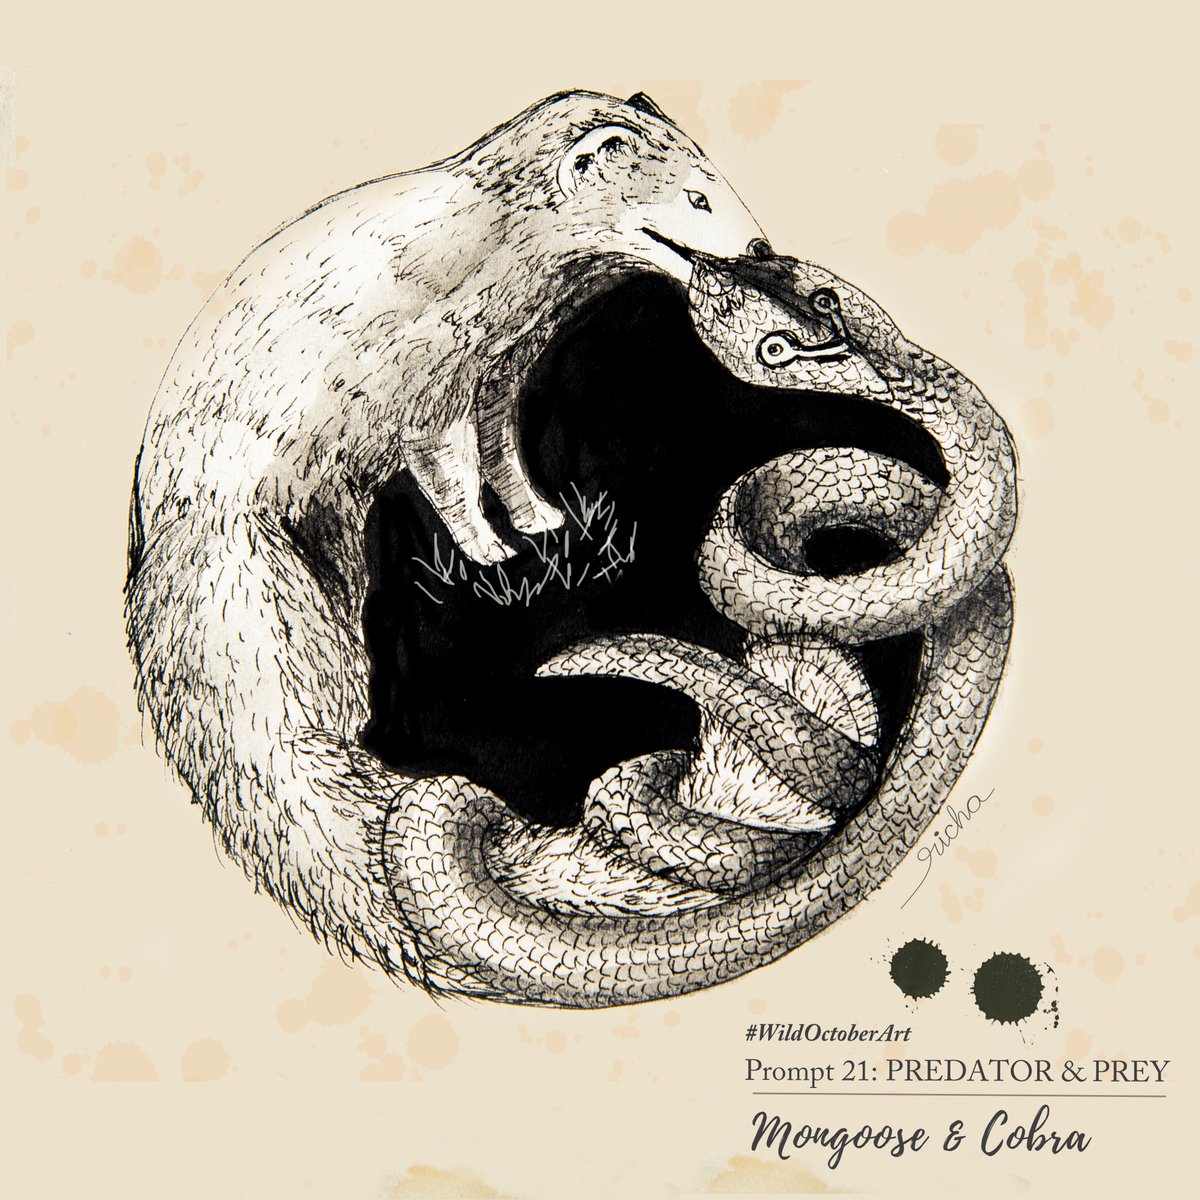 Day 21: Predator & Prey
#Mongoose and #cobra
Either side can win, but usually it is the mongoose.
#inktober2020 #wildoctoberart #wildlifeartist #predator #penandink #sketches